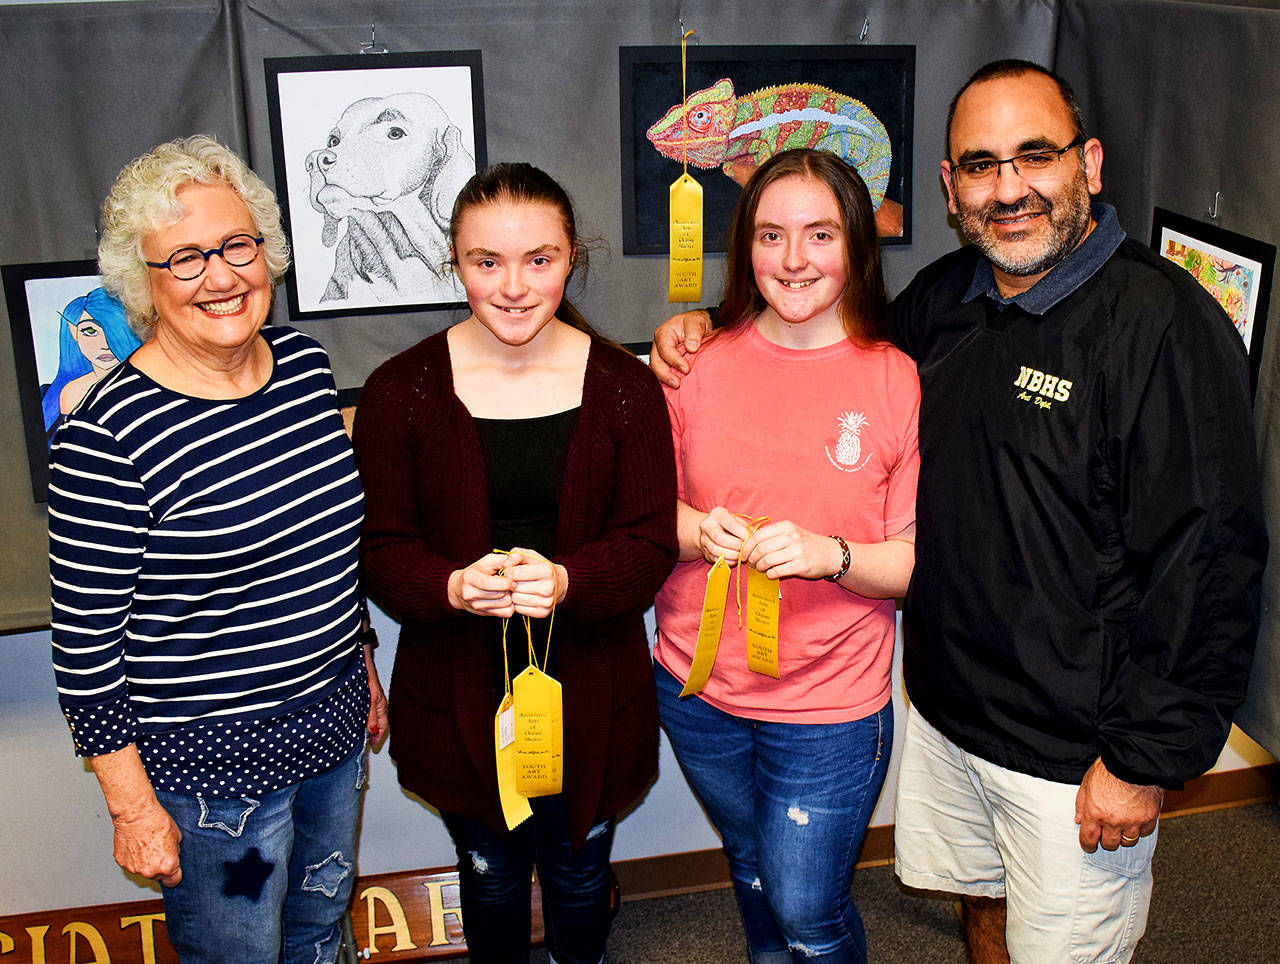 Photo by Scott B. Johnston                                North Beach High School sophomores Mia and Abby Loudenback are flanked by AAOS Youth Art Show Chairwoman Kathy Harris and art teacher Richard Villar at the March 30 show. The sisters received six awards between them.